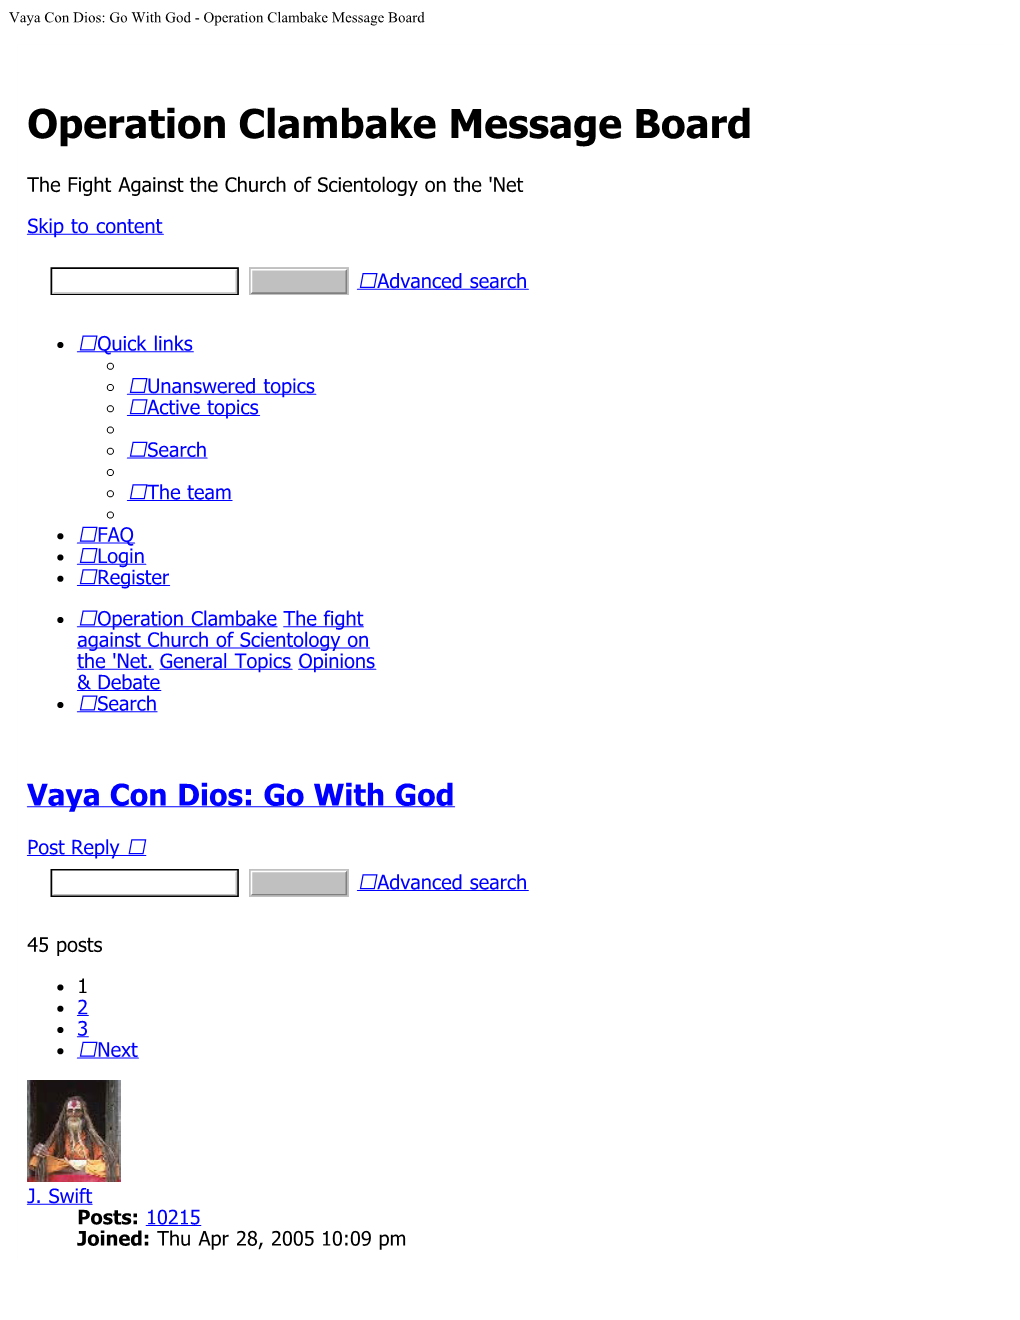 Vaya Con Dios: Go with God - Operation Clambake Message Board